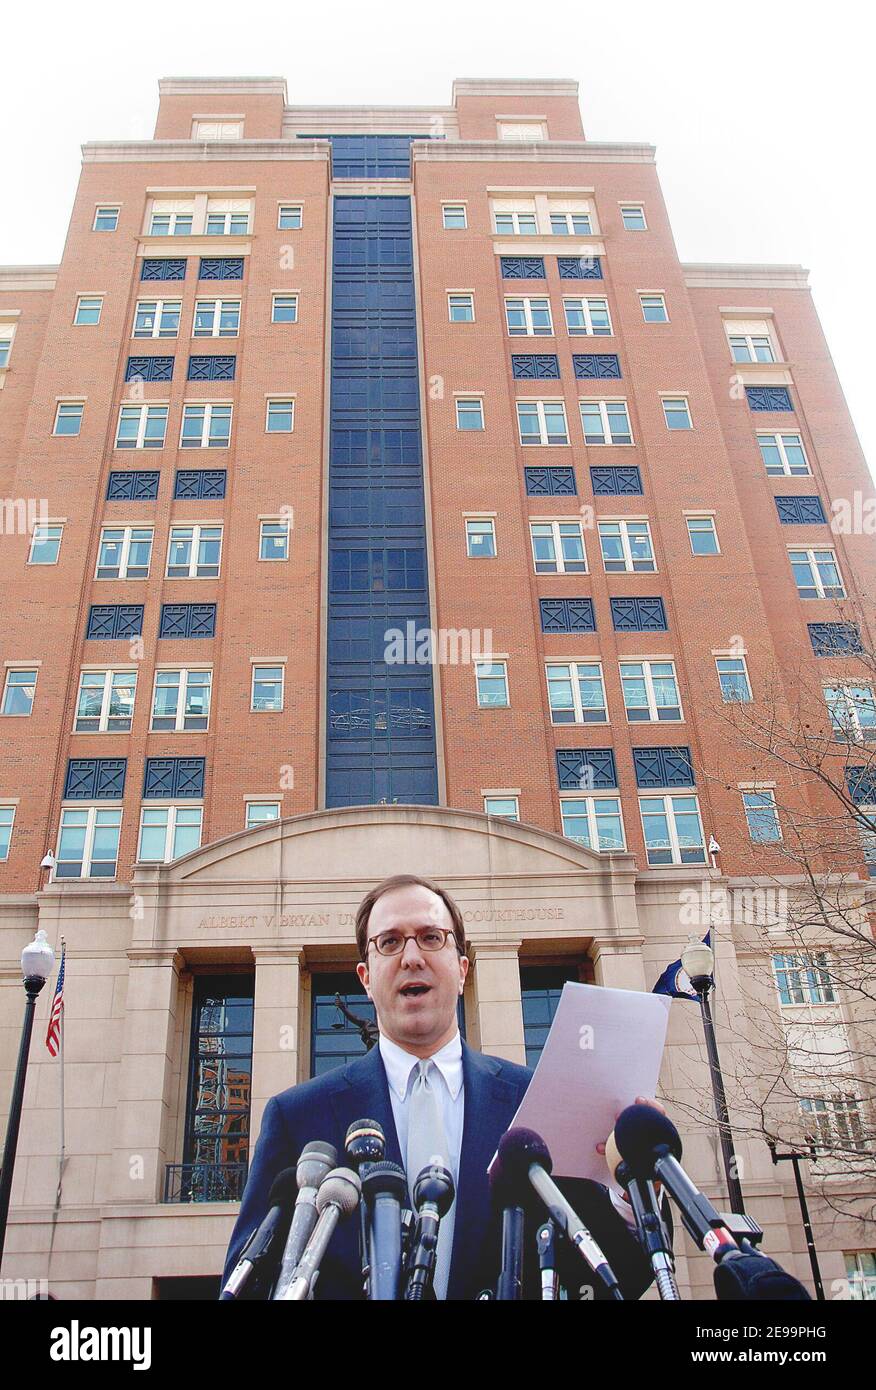 Ed Adams, a spokesman for U.S. District Court, pauses as he reads a ruling of the sentencing trial of Zacarias Moussaoui to the news media outside U.S. District Court in Alexandria, VA, USA on April 3, 2006. A jury ruled that Al-Qaeda conspirator Zacarias Moussaoui is eligible for the death penalty taking his trial into a new phase to decide whether he should be executed. Photo by Olivier Douliery/ABACAPRESS.COM Stock Photo